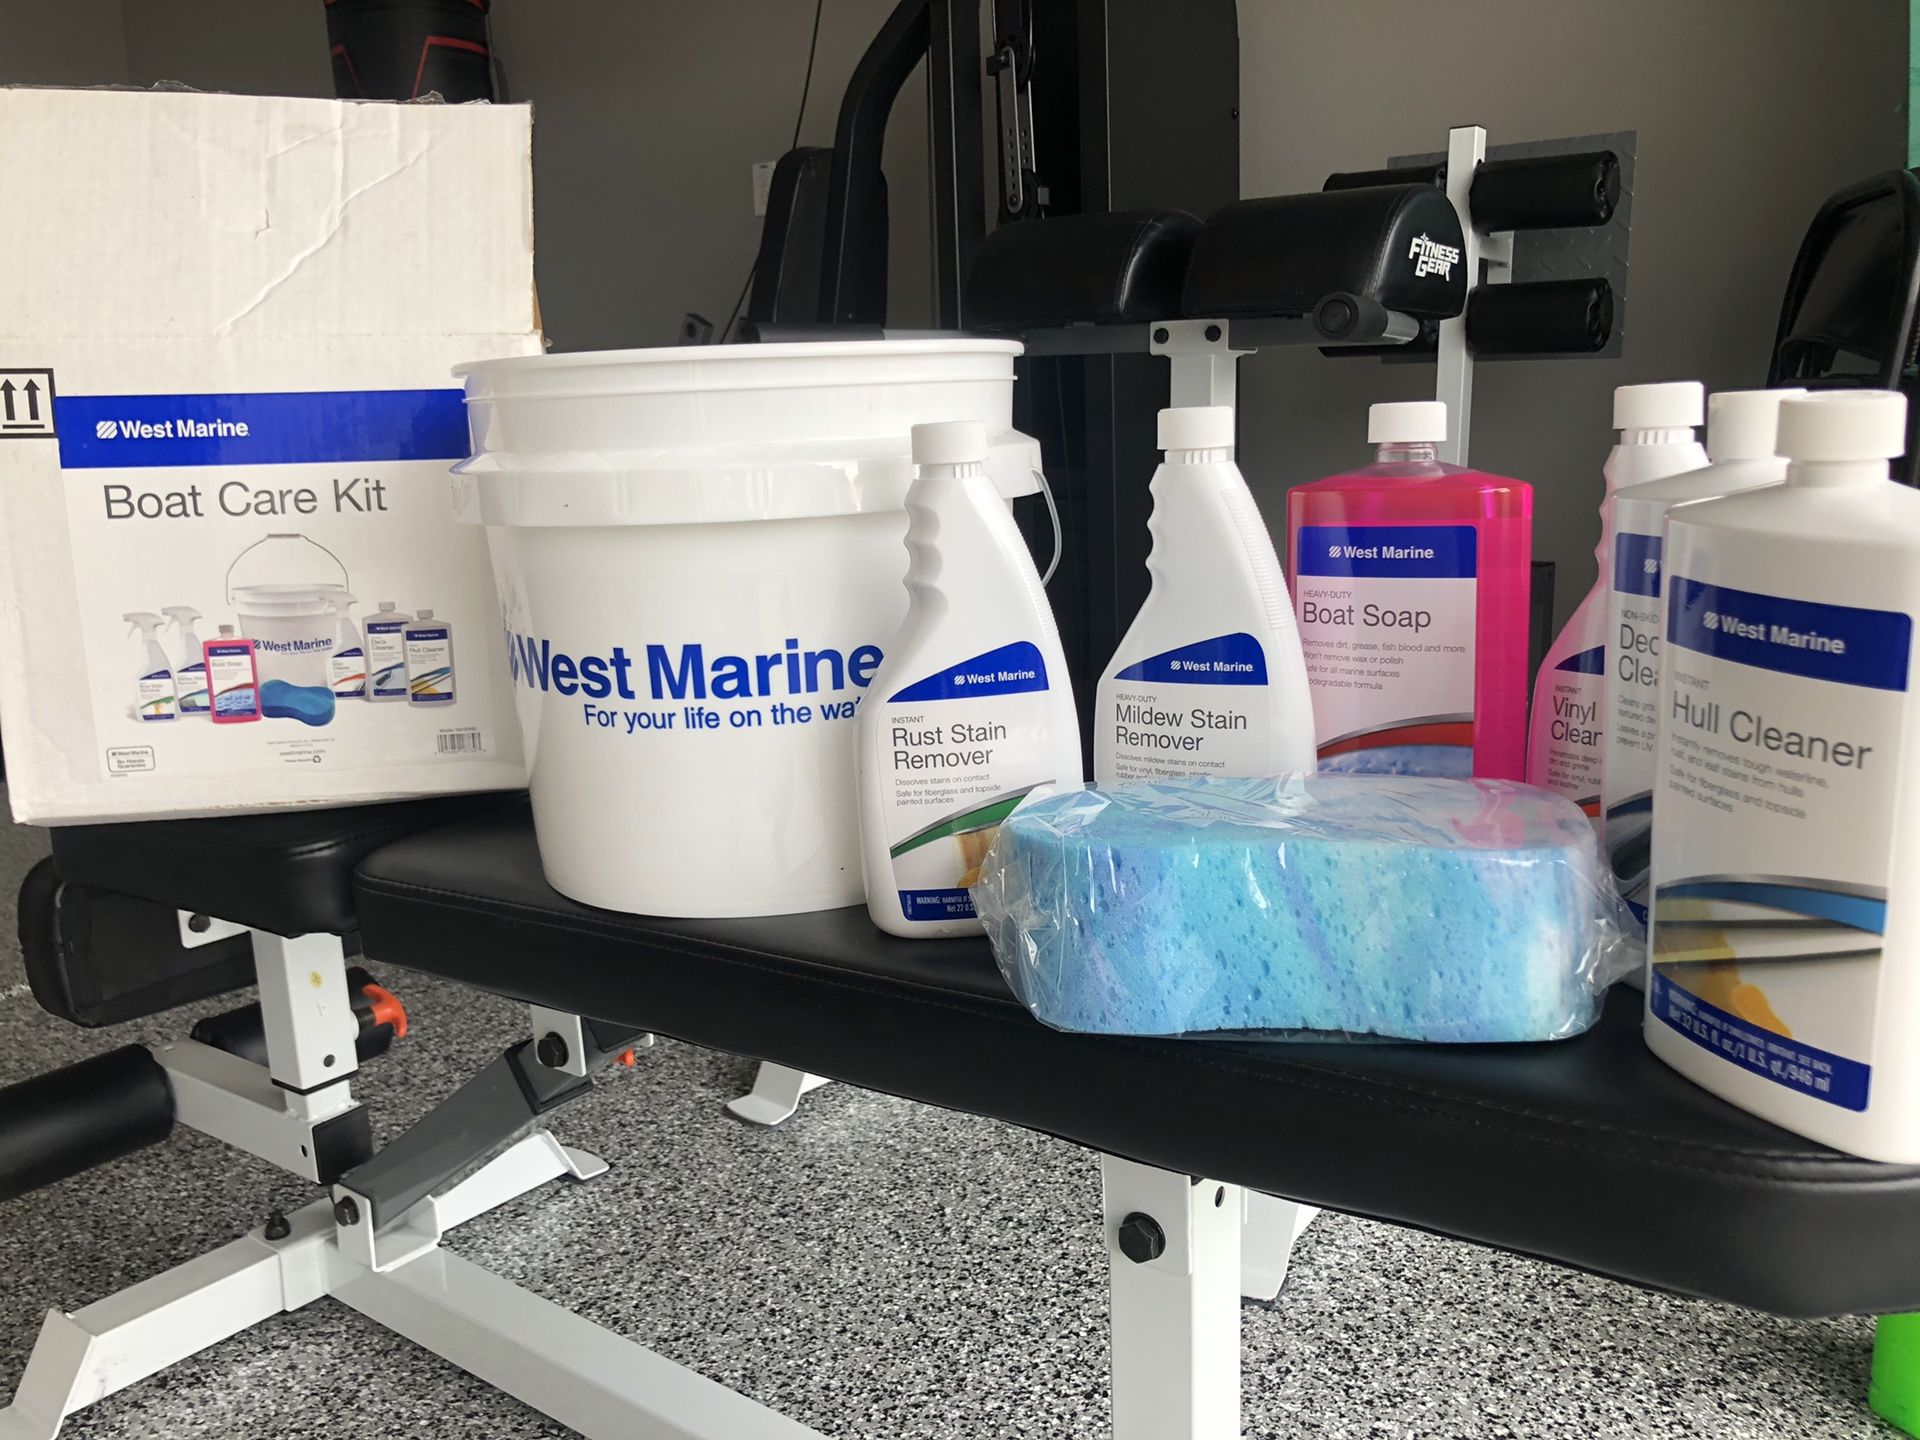 West Markne Boat Care Kit - not used